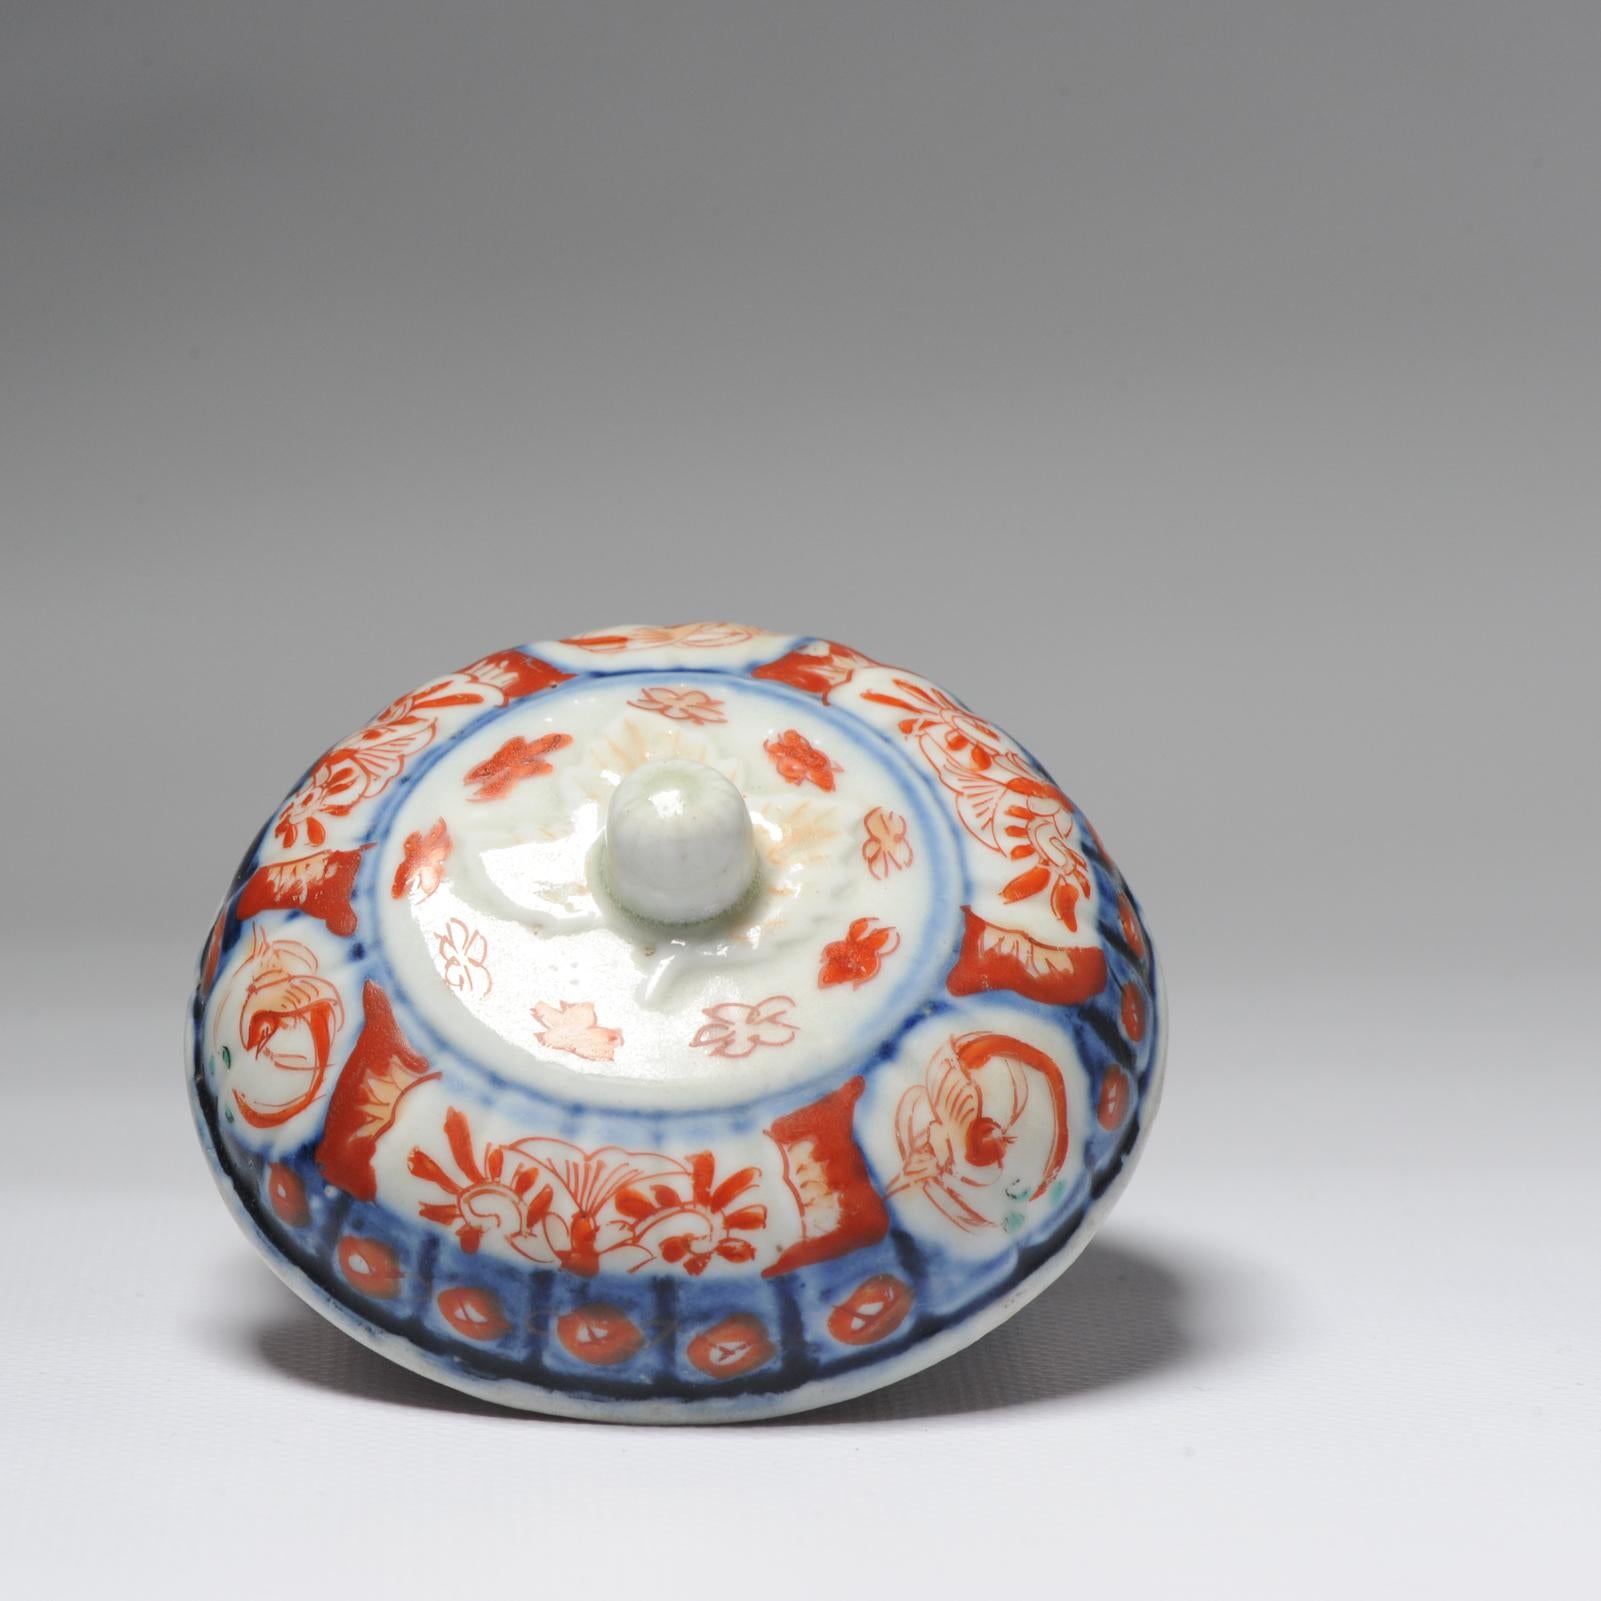 Great Japanese Imari Box Peony Flowers Butterfly Flowers, 19th Century In Good Condition For Sale In Amsterdam, Noord Holland